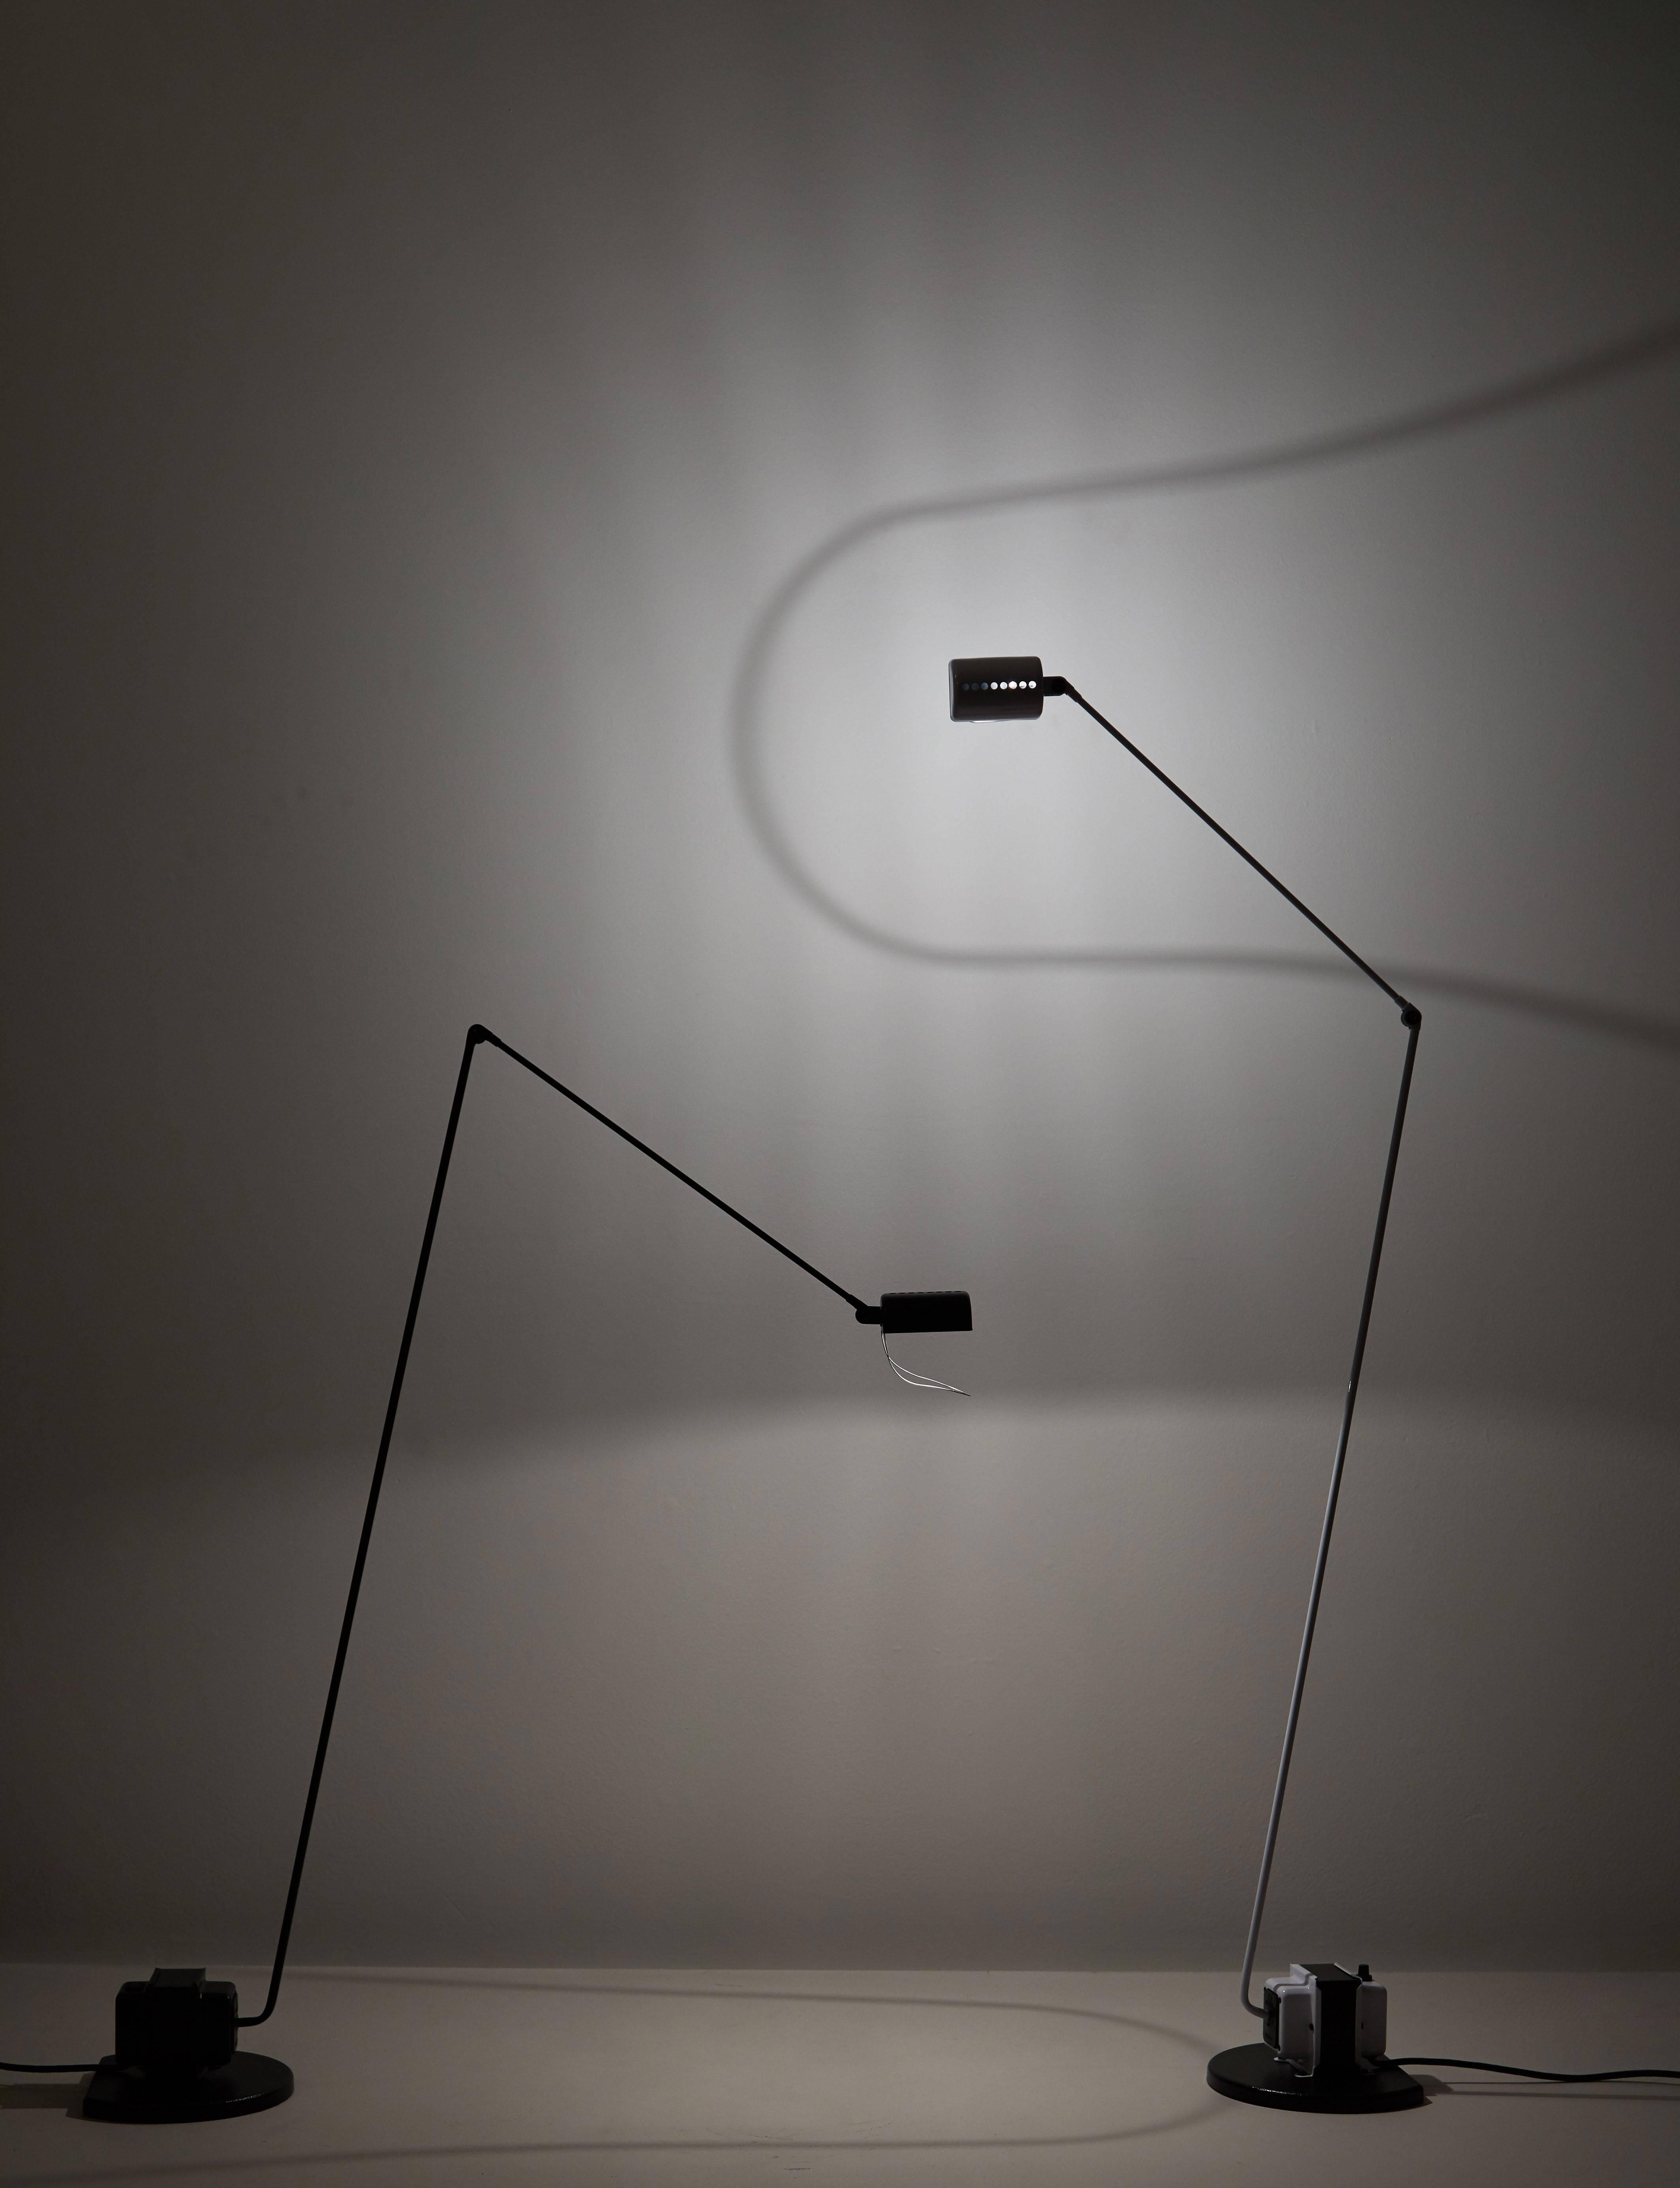 Daphine Terra floor lamp, originally designed by Tommaso Cimini in Italy,1972. Composed of a metal frame with an articulated arm and diffuser which pivots 360° and and adjustable shade. Takes one G9 halogen bulb or LED 8w bulb. On/off  floor switch.